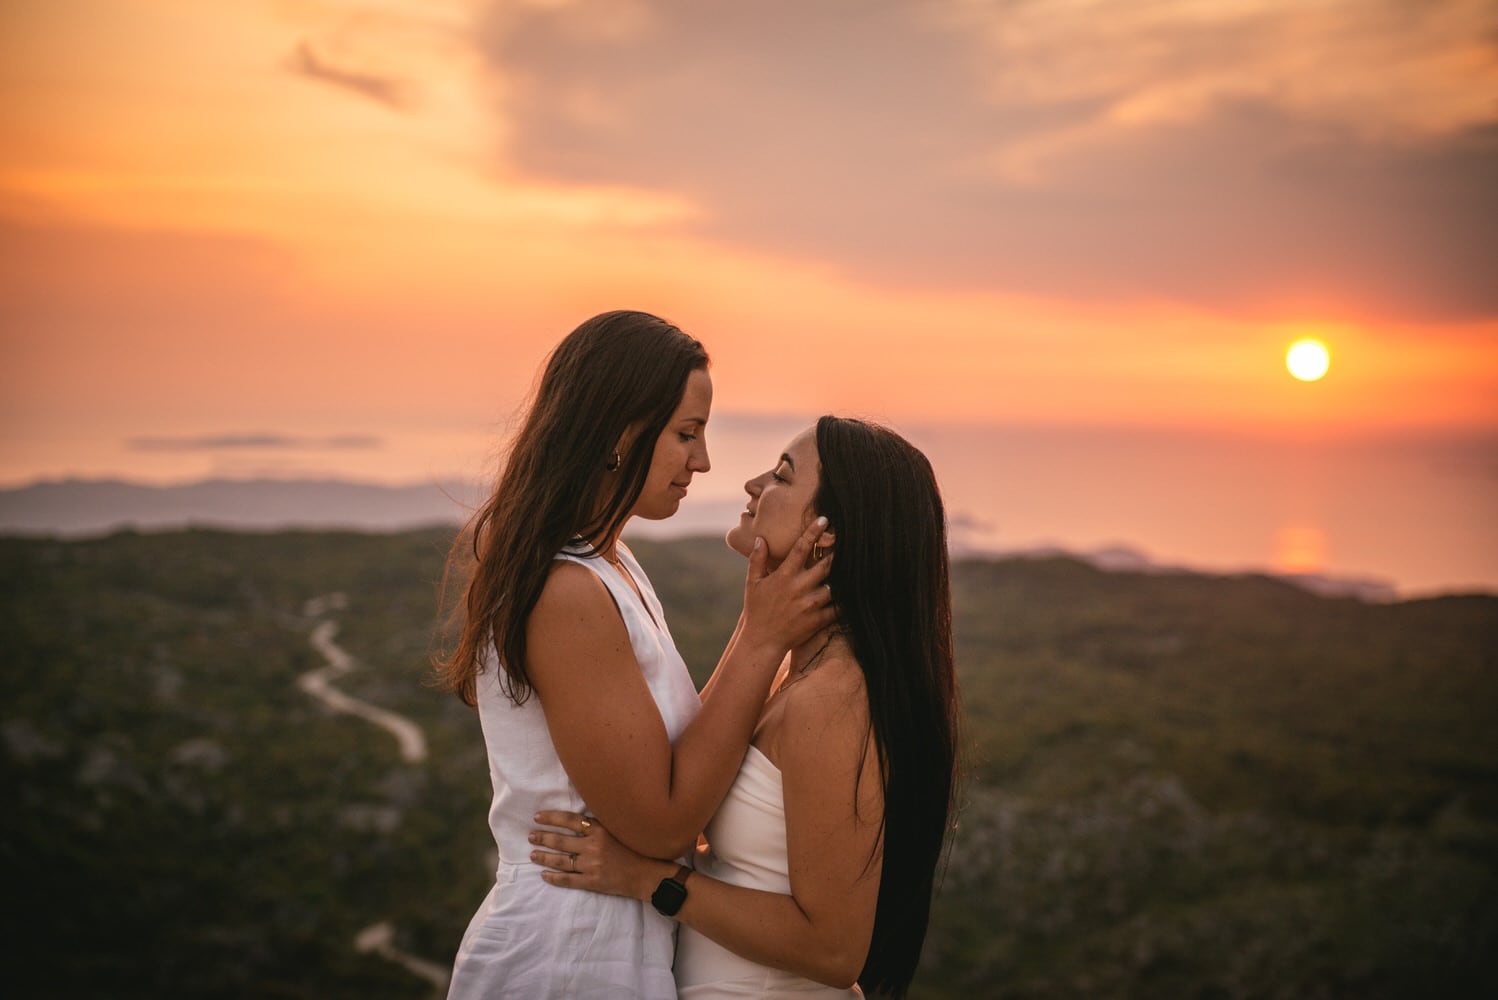 Twilight's tender touch: Brides stand against the sunset, twilight's warmth embracing their love during their Corfu elopement.